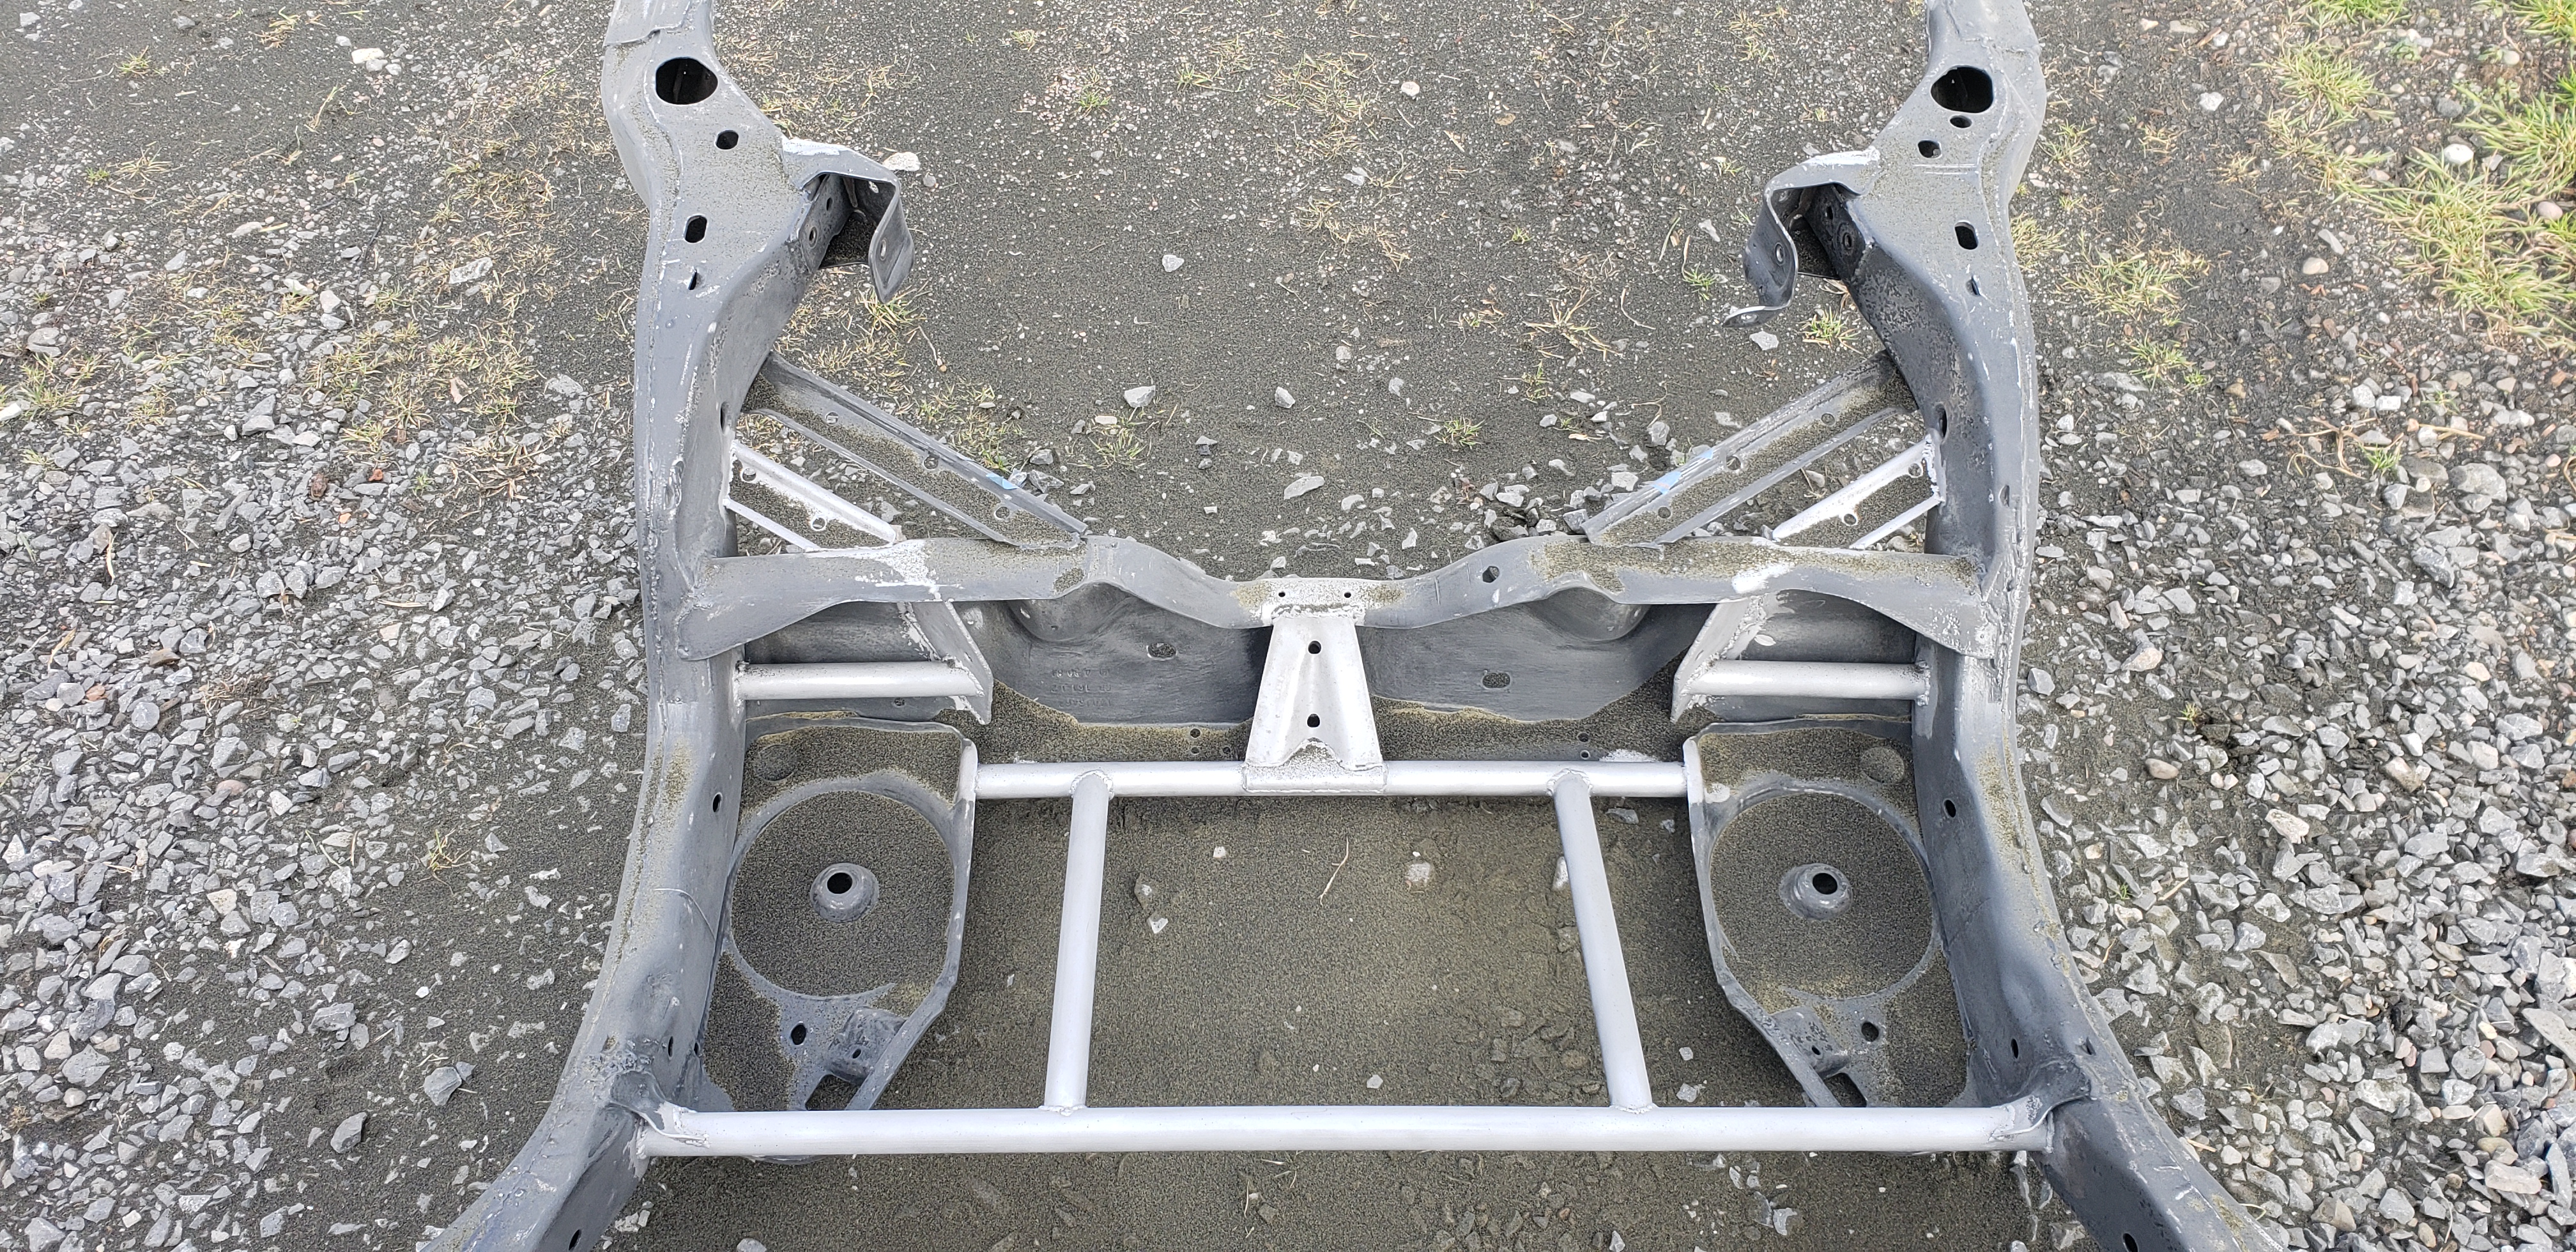 New Frame Prep For Paint After Repair And Modification (2).jpg